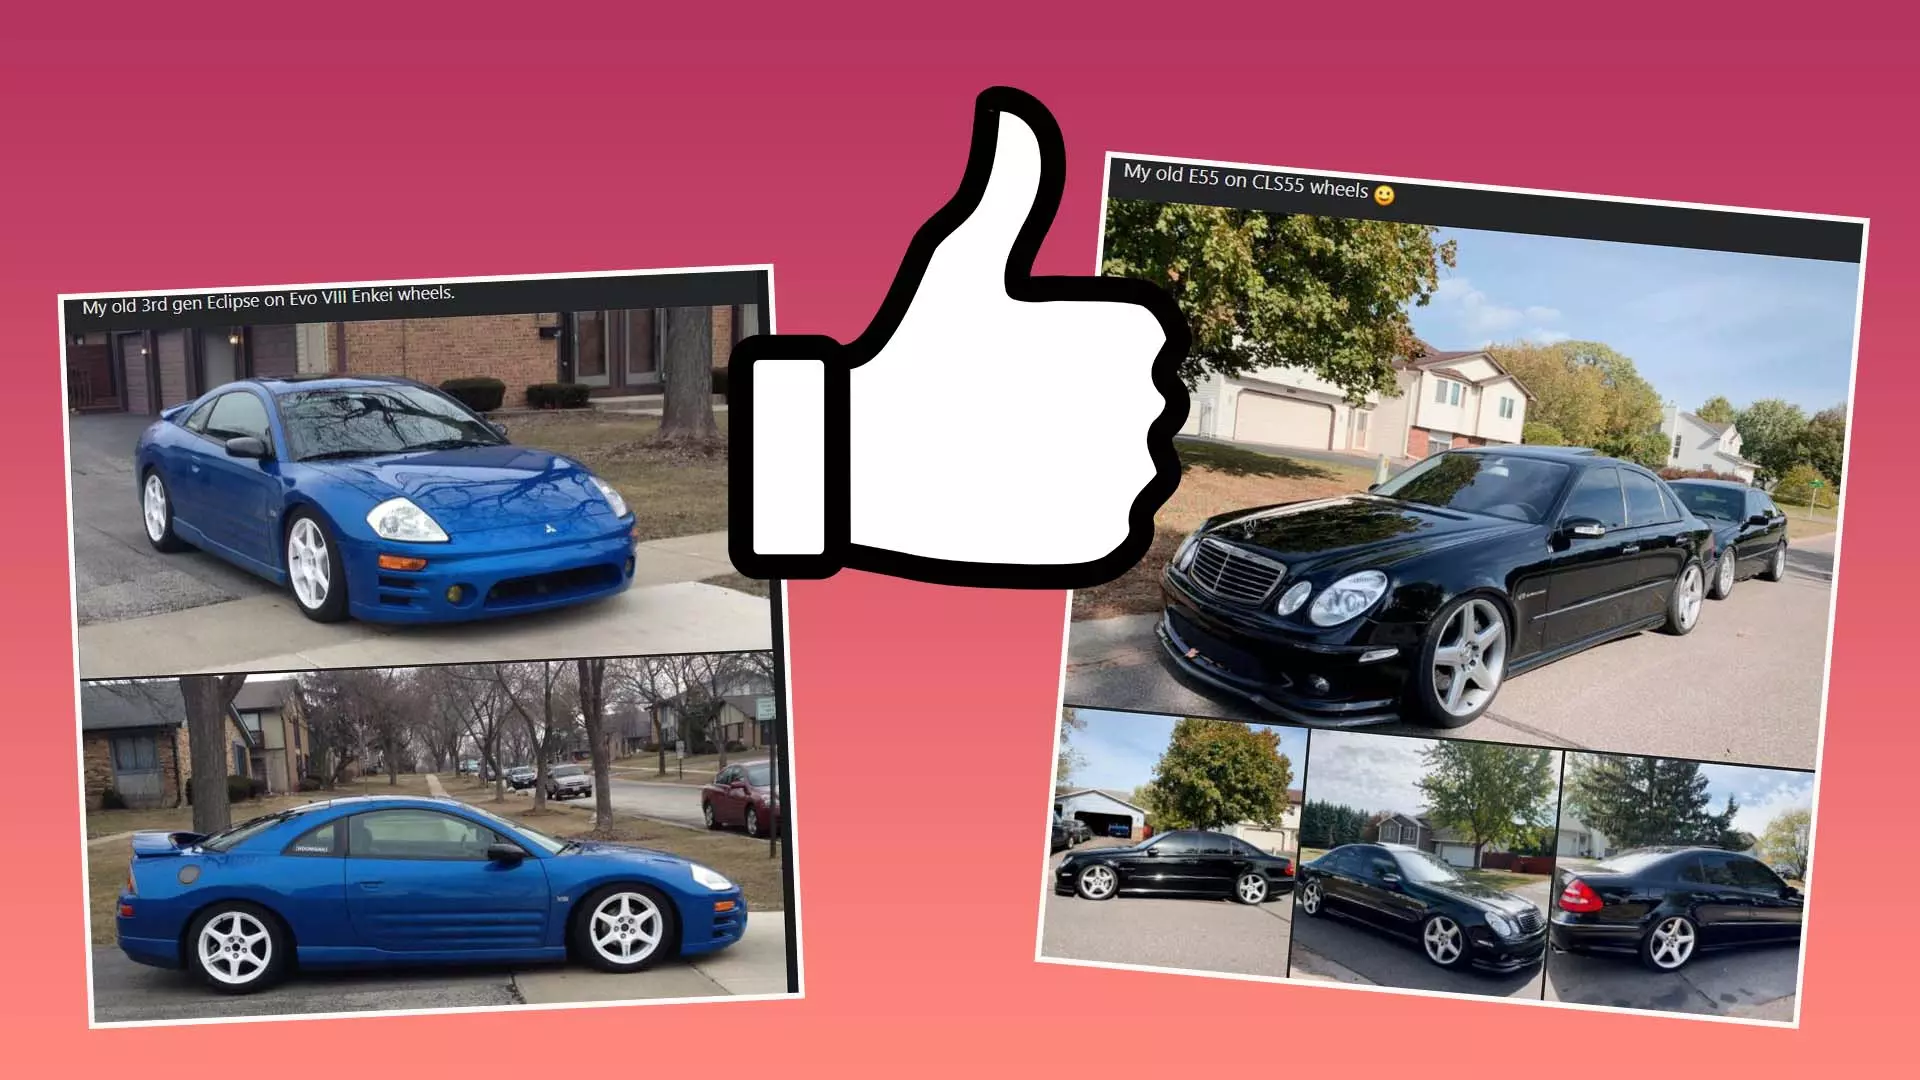 This Facebook Group Is Dedicated To Spotting Stock Wheels On The Wrong Cars